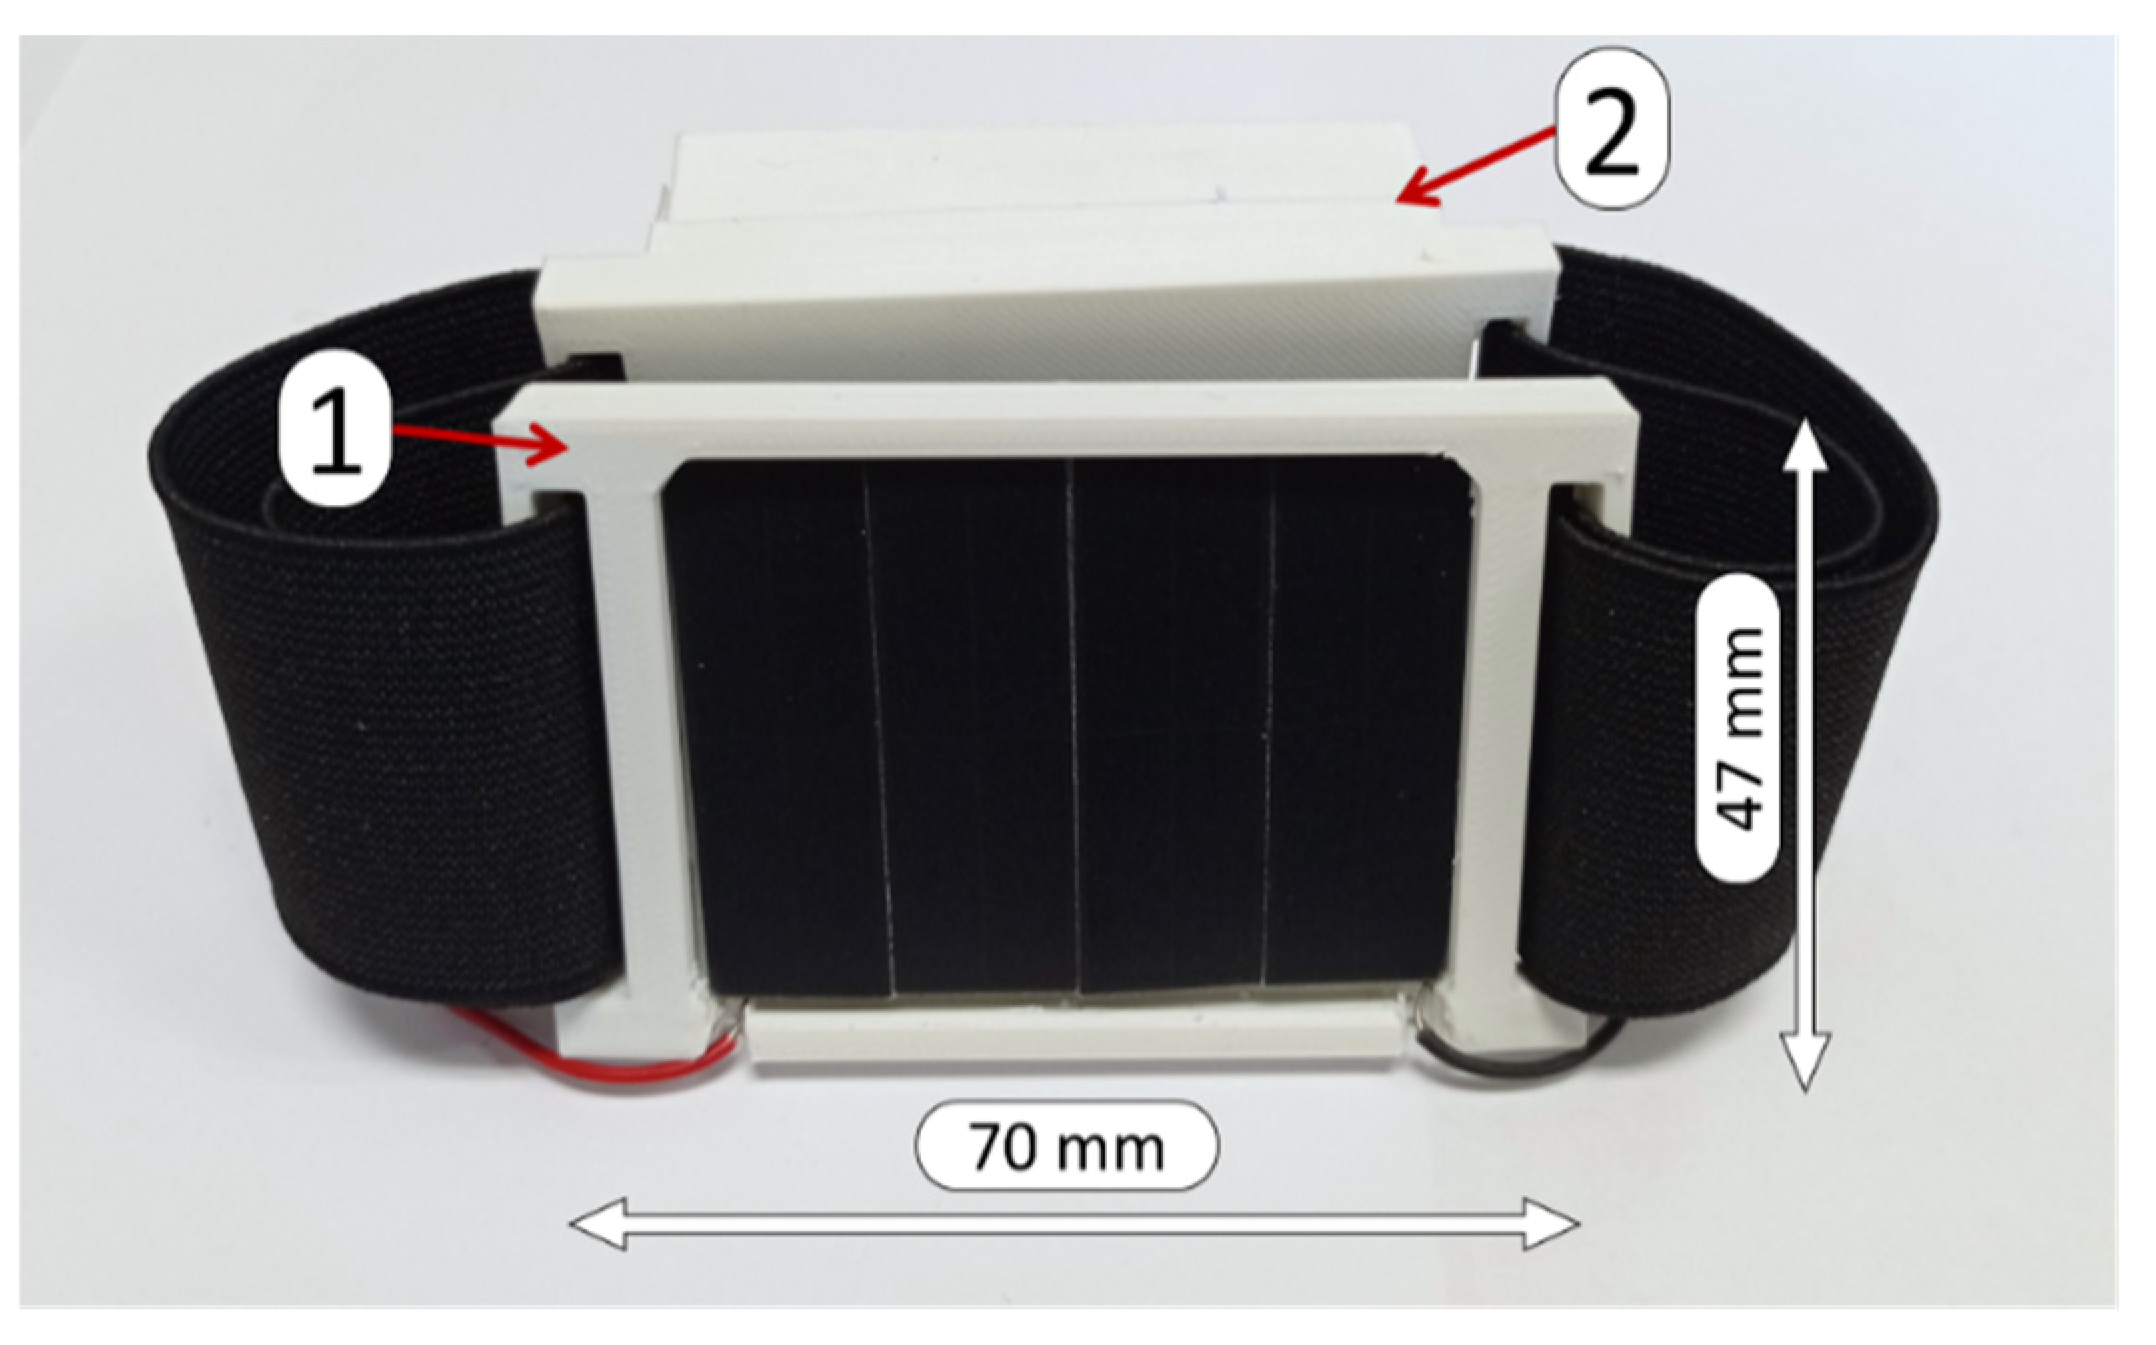 Sensors | Free Full-Text | Solar Energy Harvesting to Improve Capabilities  of Wearable Devices